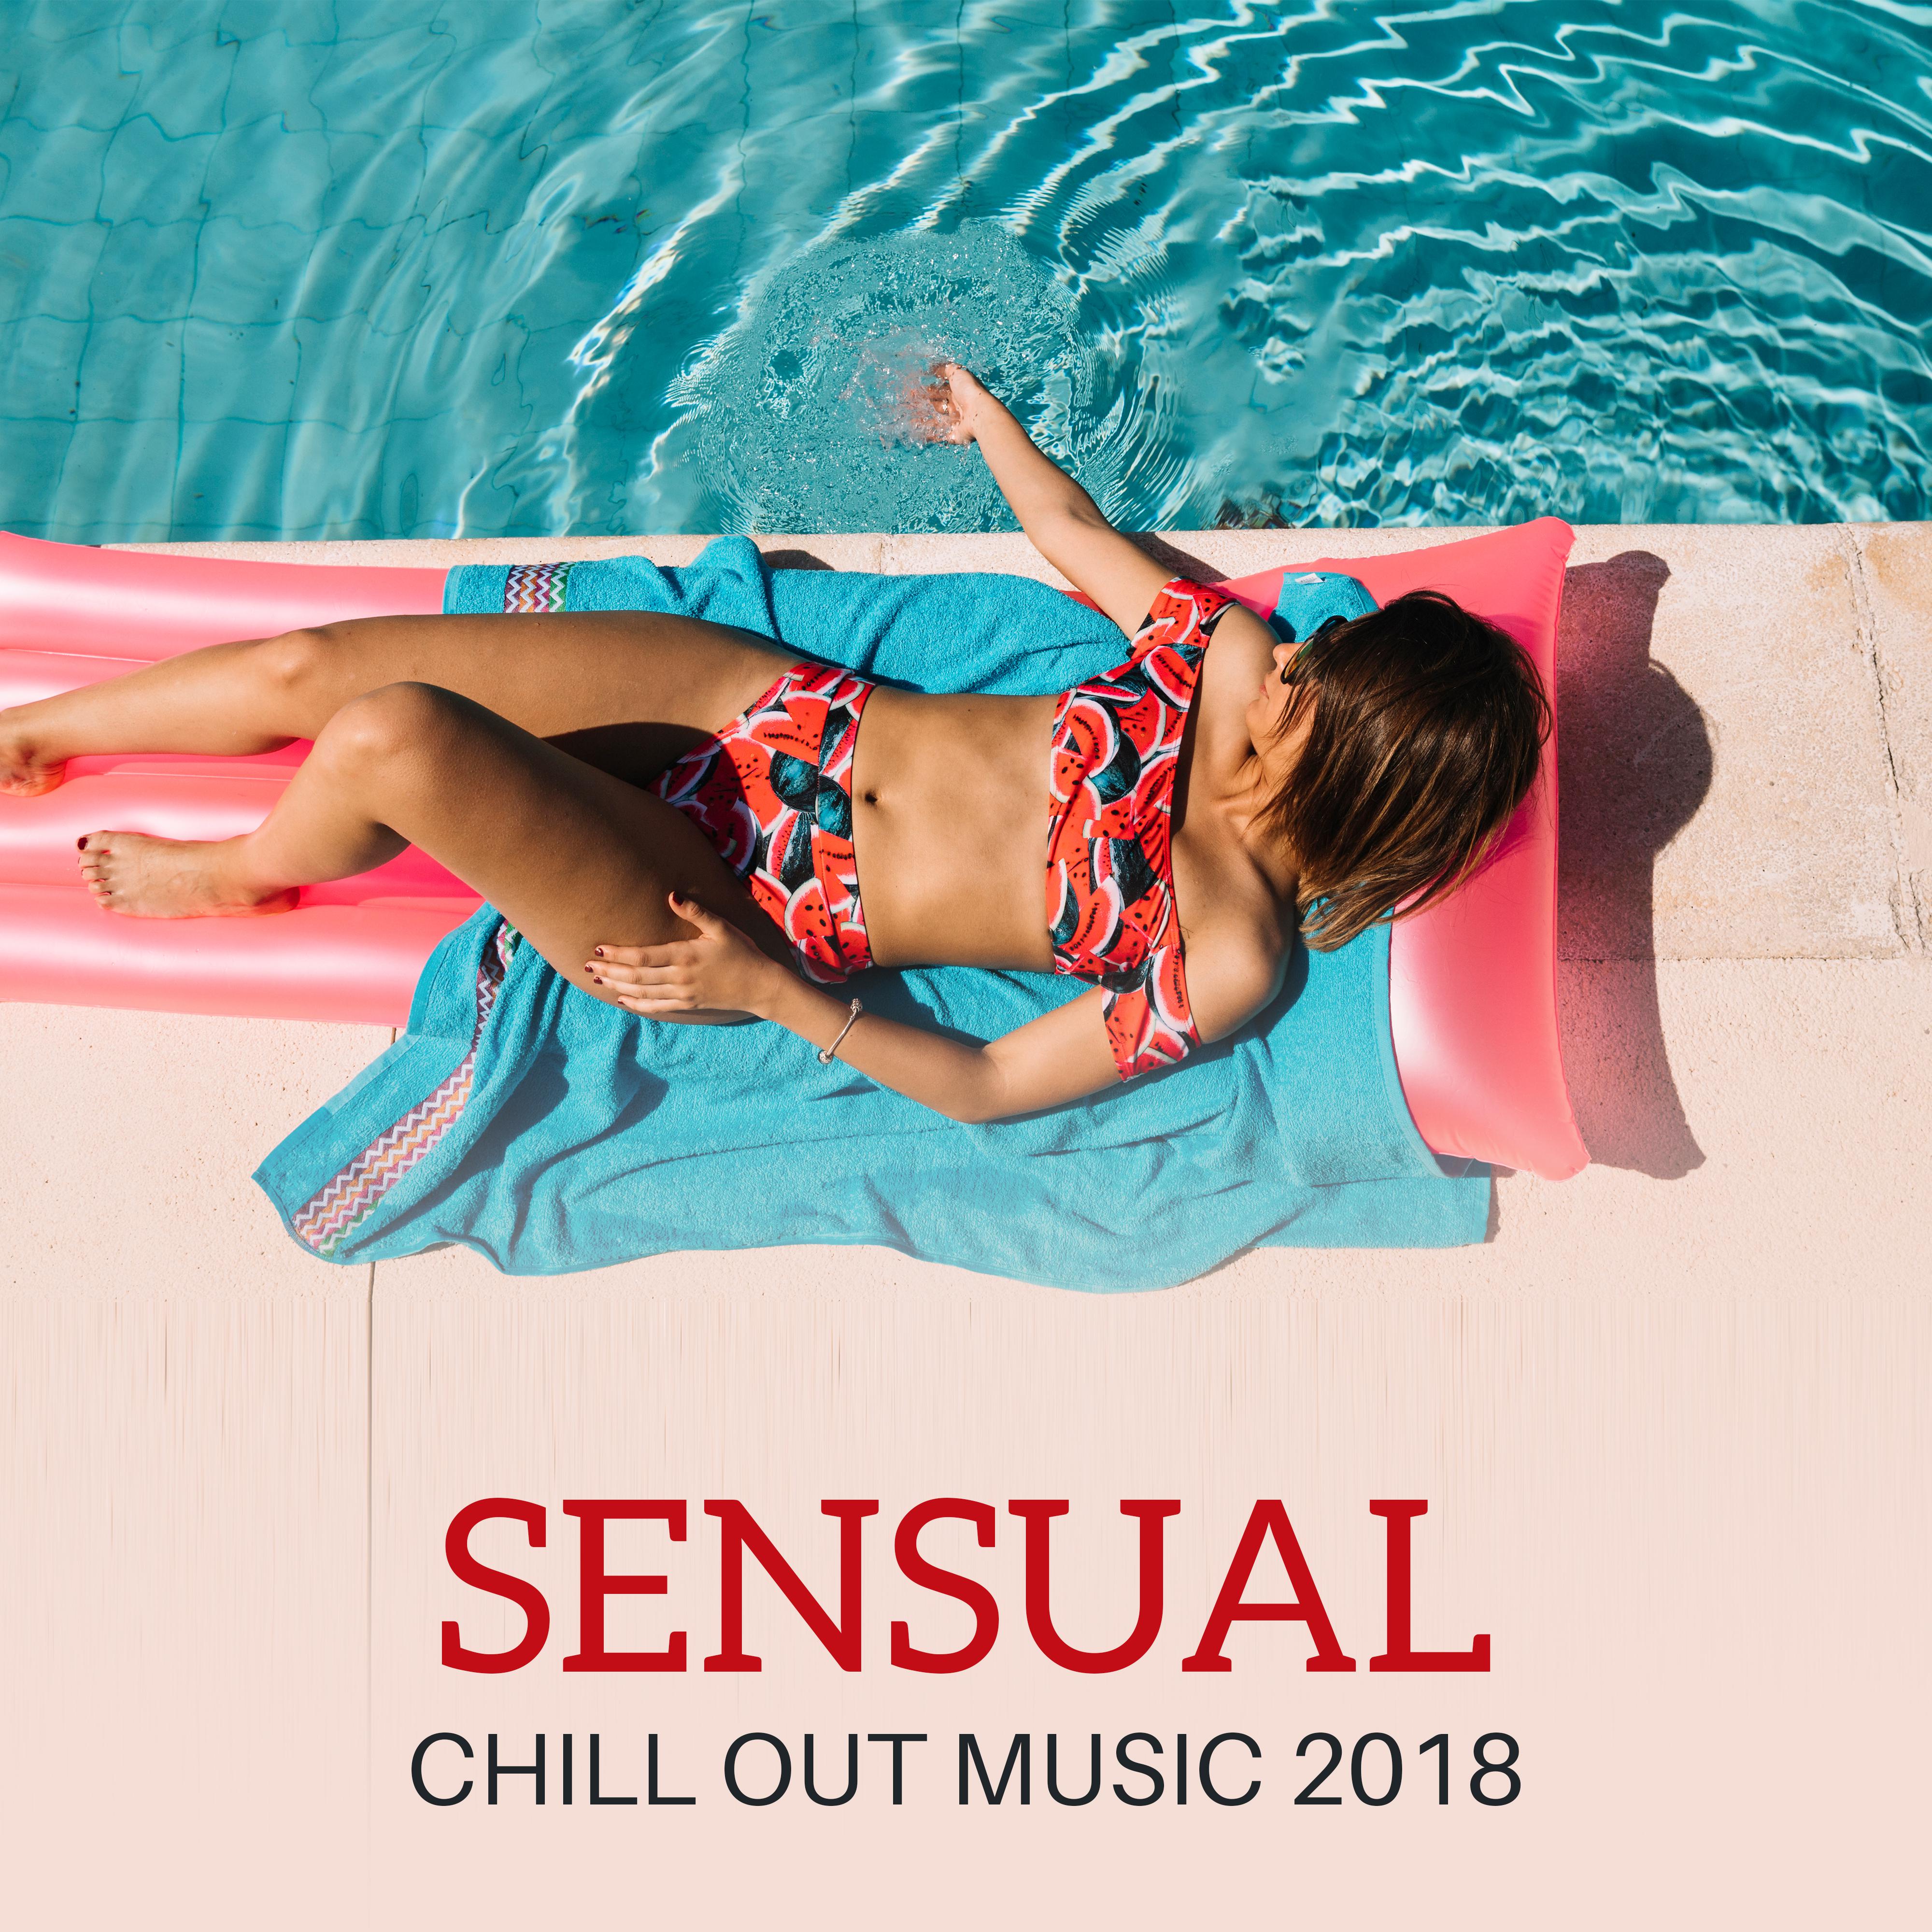 Sensual Chill Out Music 2018